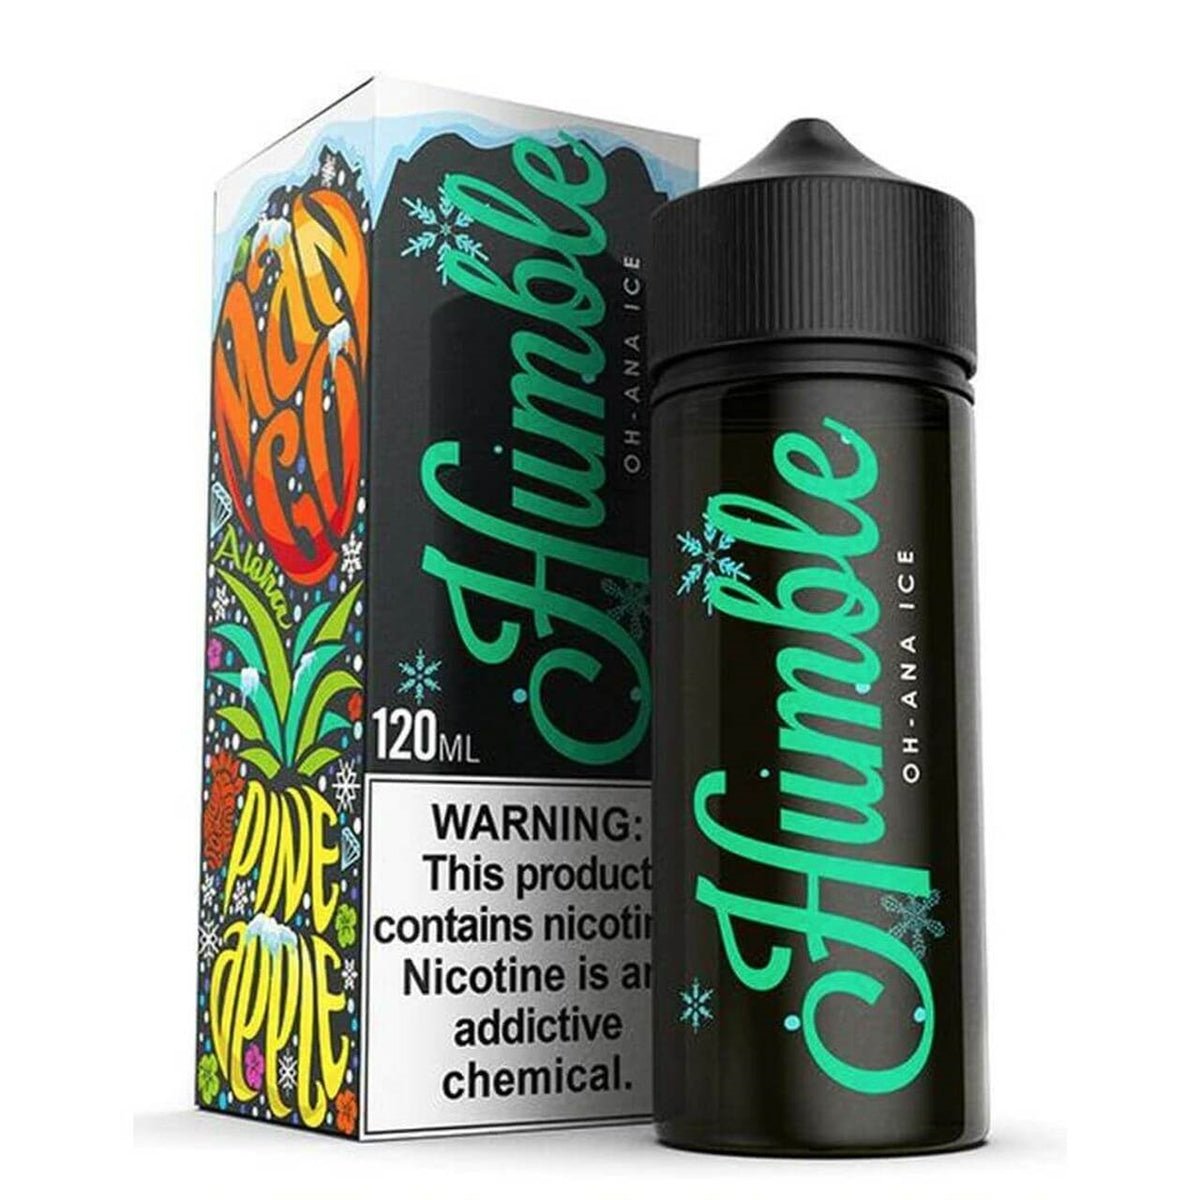 HUMBLE JUICE CO - OH-ANA ICE - 120ML - EJUICEOVERSTOCK.COM